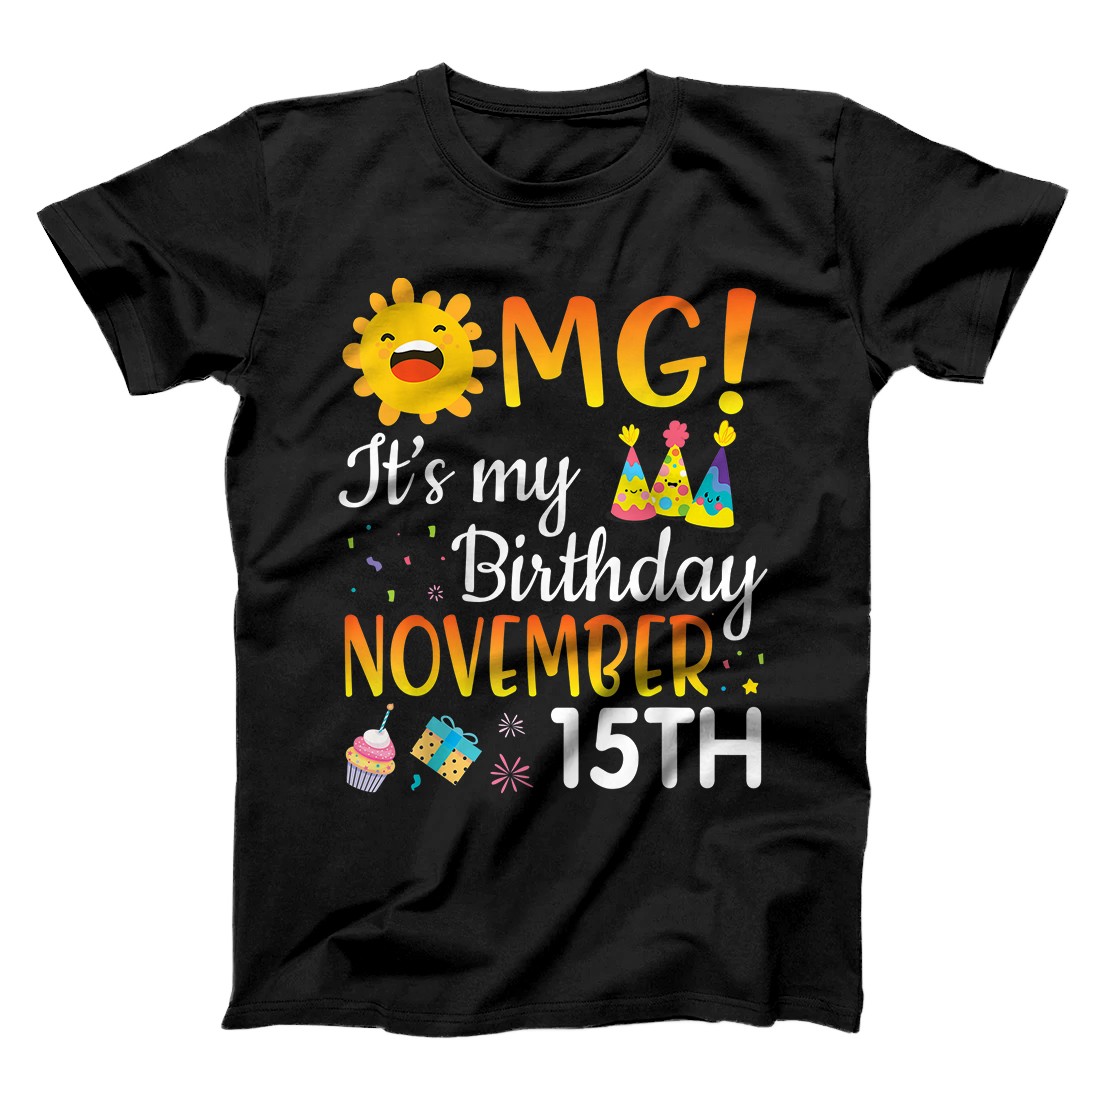 Personalized Sunlight Cakes OMG It's My Birthday On November 15th Happy T-Shirt